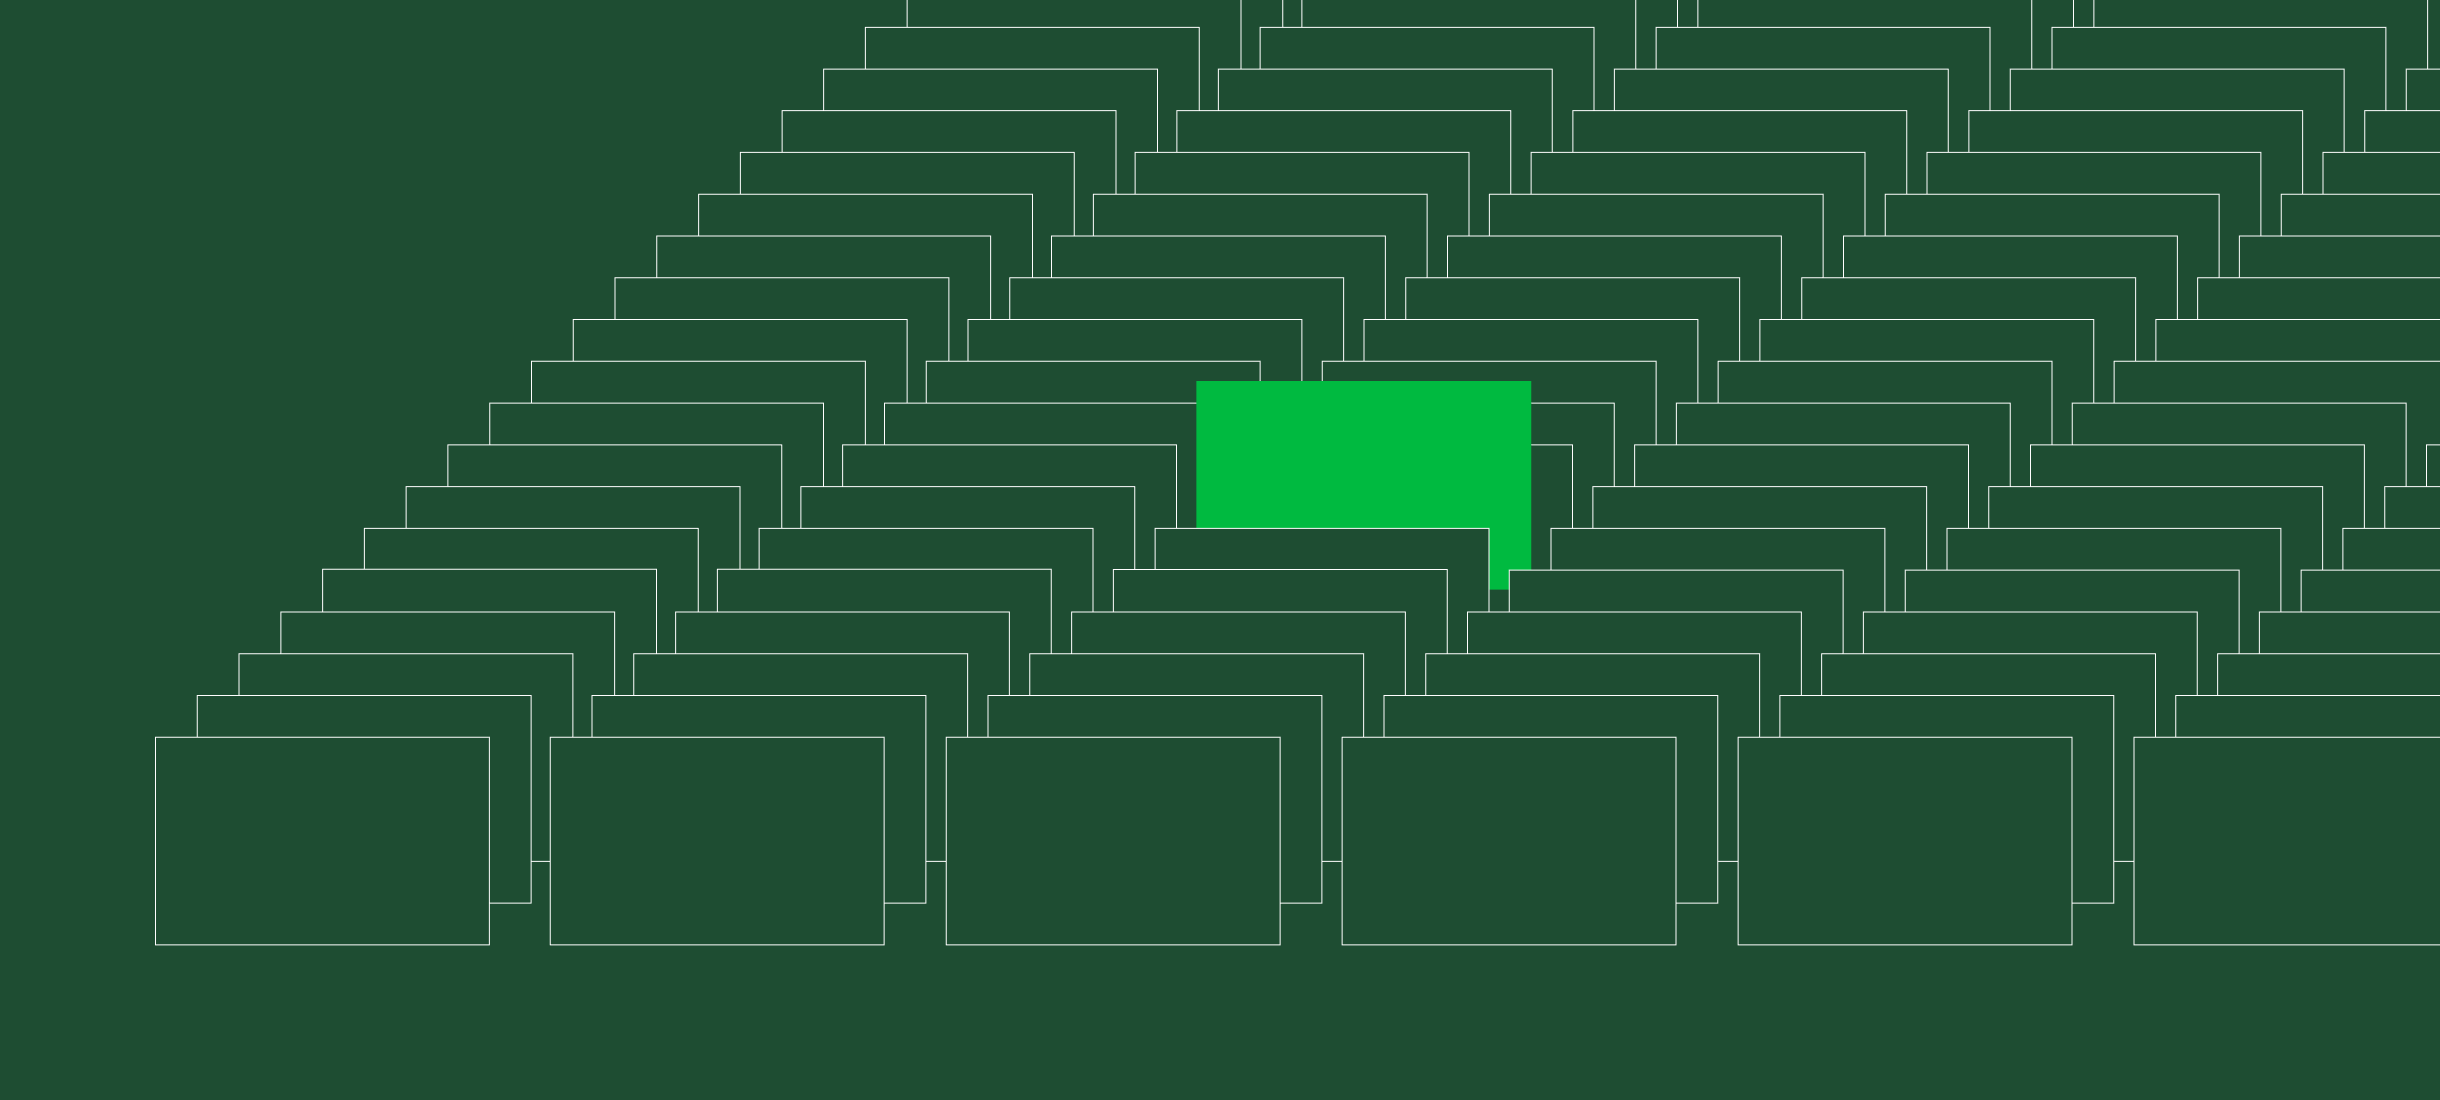 Illustration of rectangles on forest green background, with one bright green